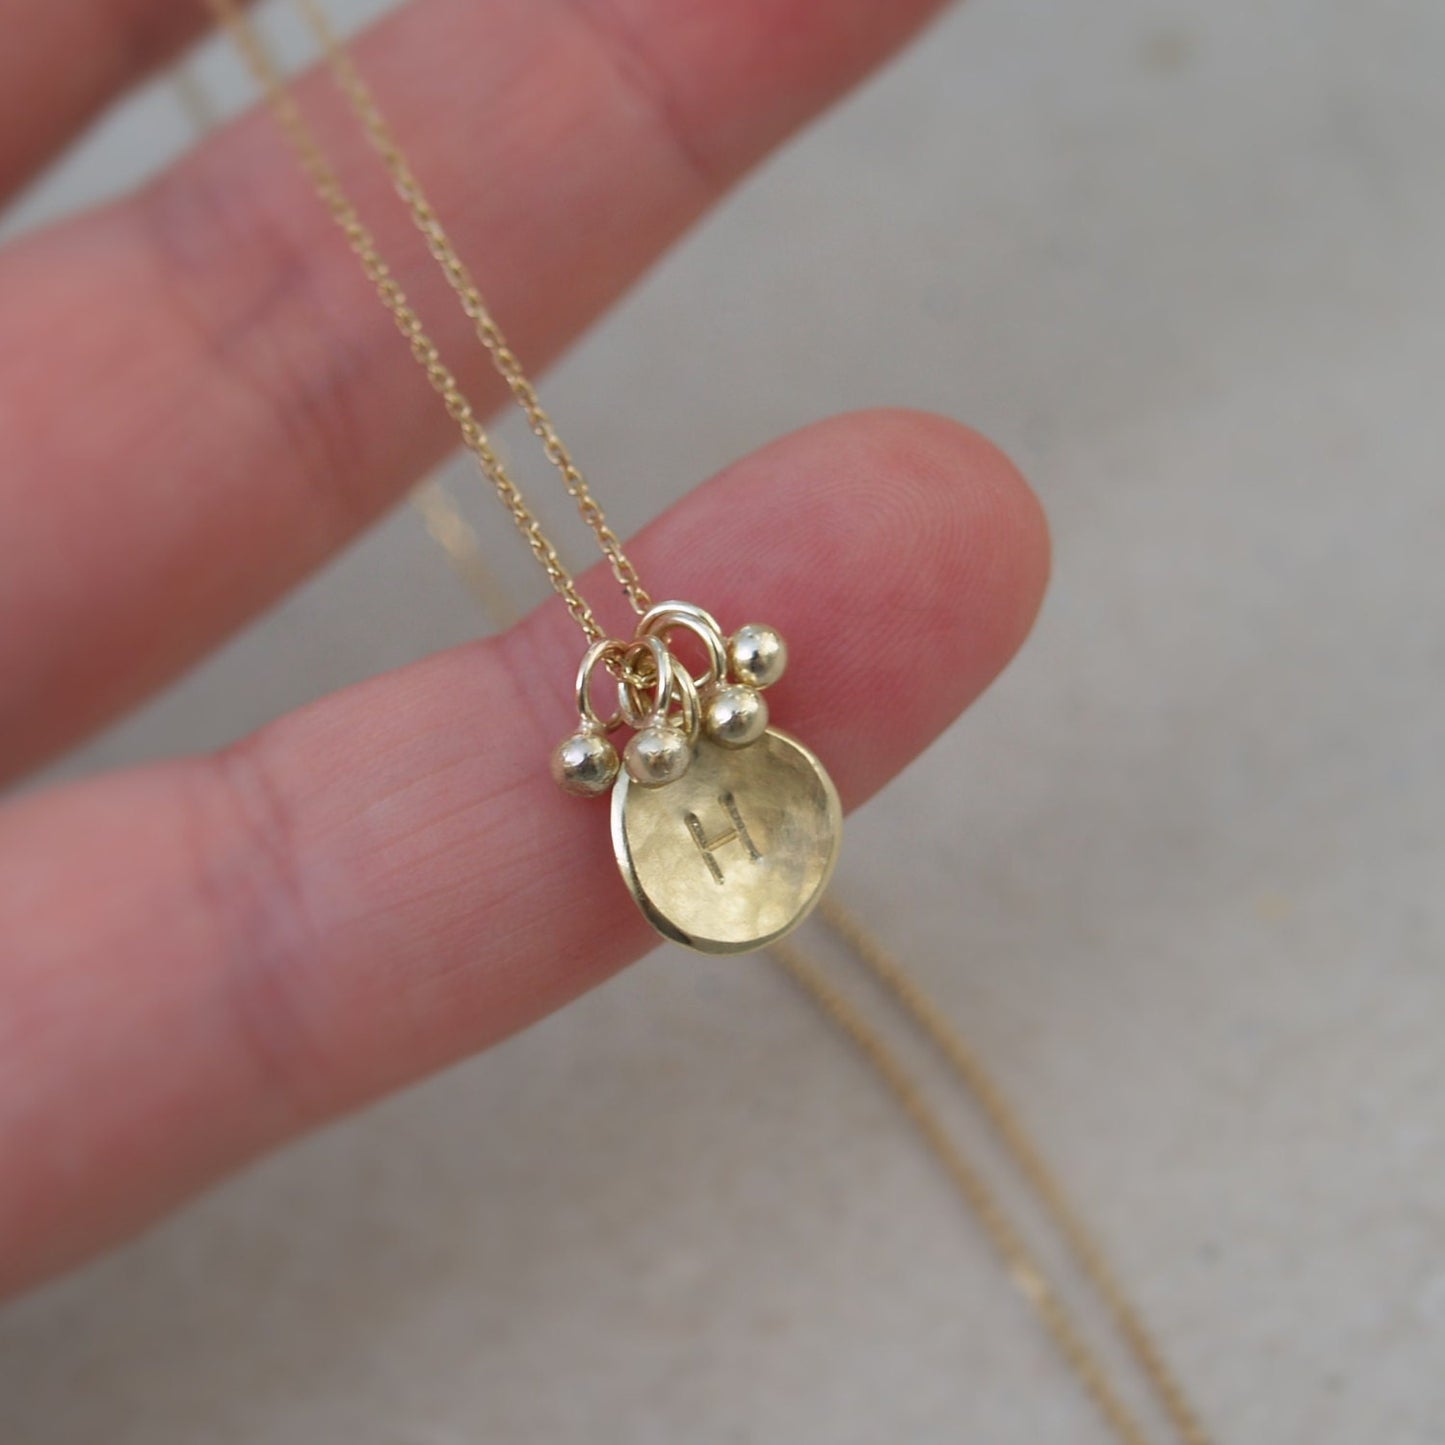 Handmade to order - 9ct solid yellow gold personalised small petal charm pendant with seed ball detail on a chain